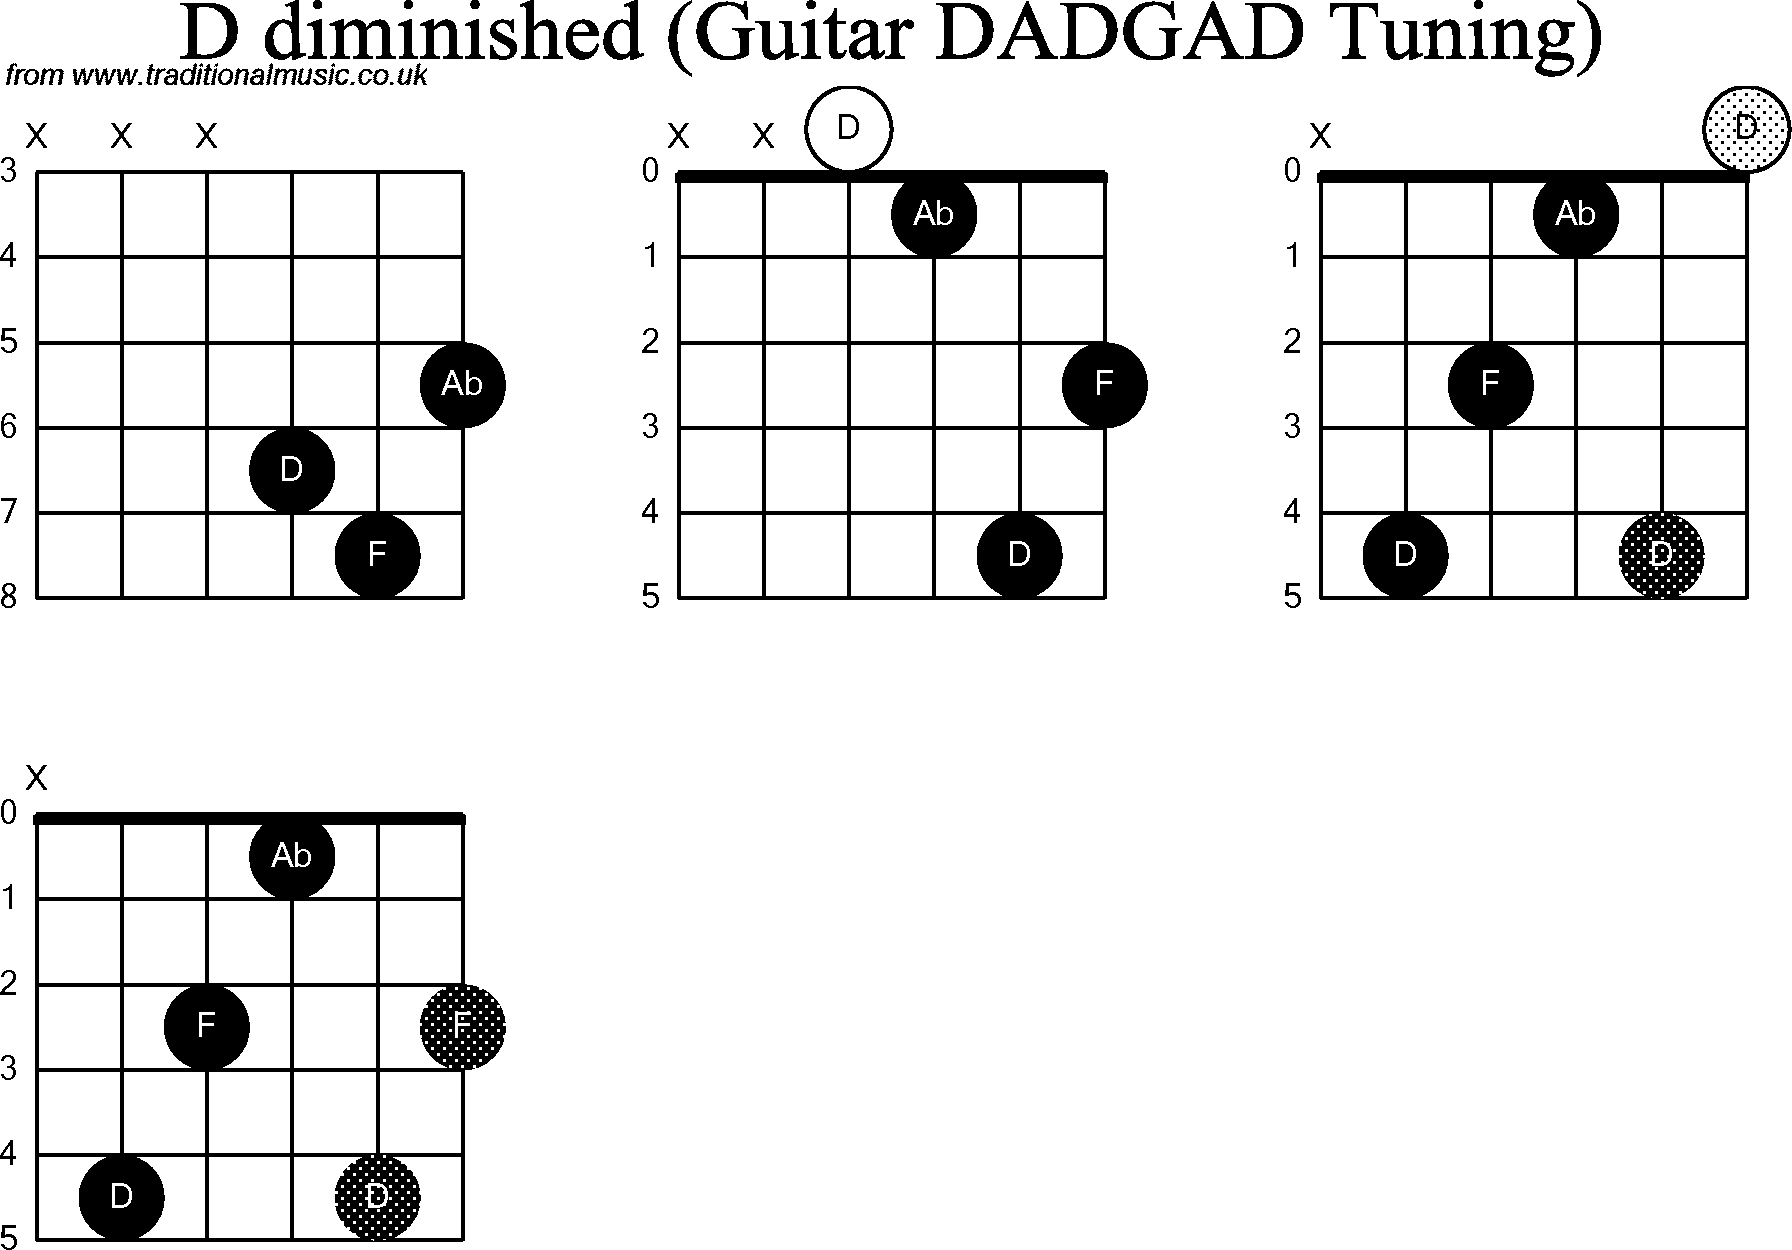 Chord Diagrams for D Modal Guitar(DADGAD), D Diminished